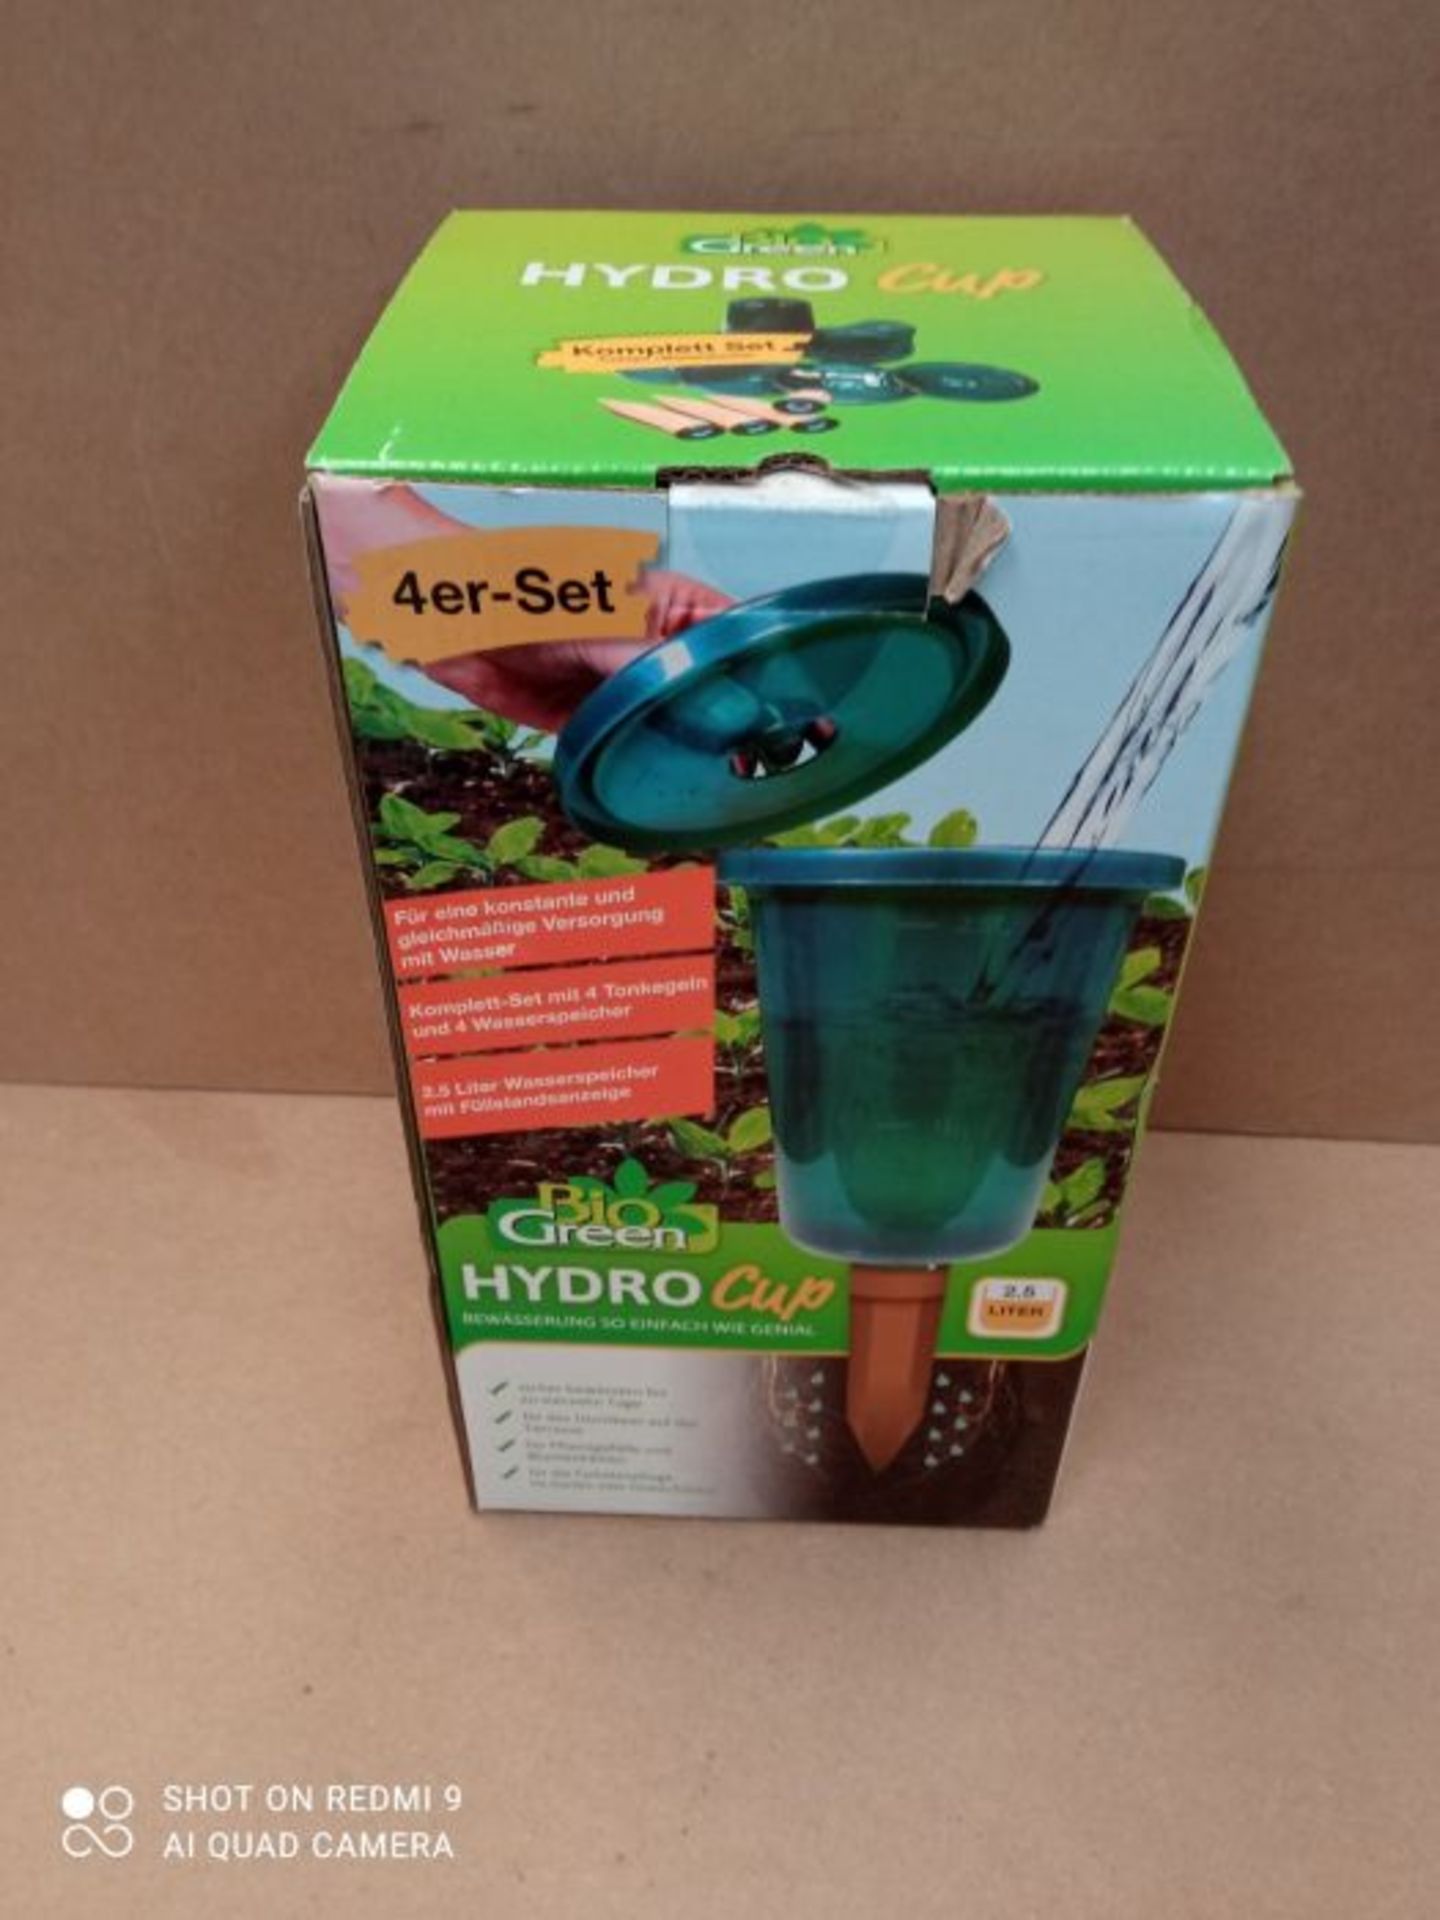 Bio Green, 4er Set Hydro, Set of 4 Clay Cones with Matching Cup Attachments, 2.5 Litre - Image 2 of 3